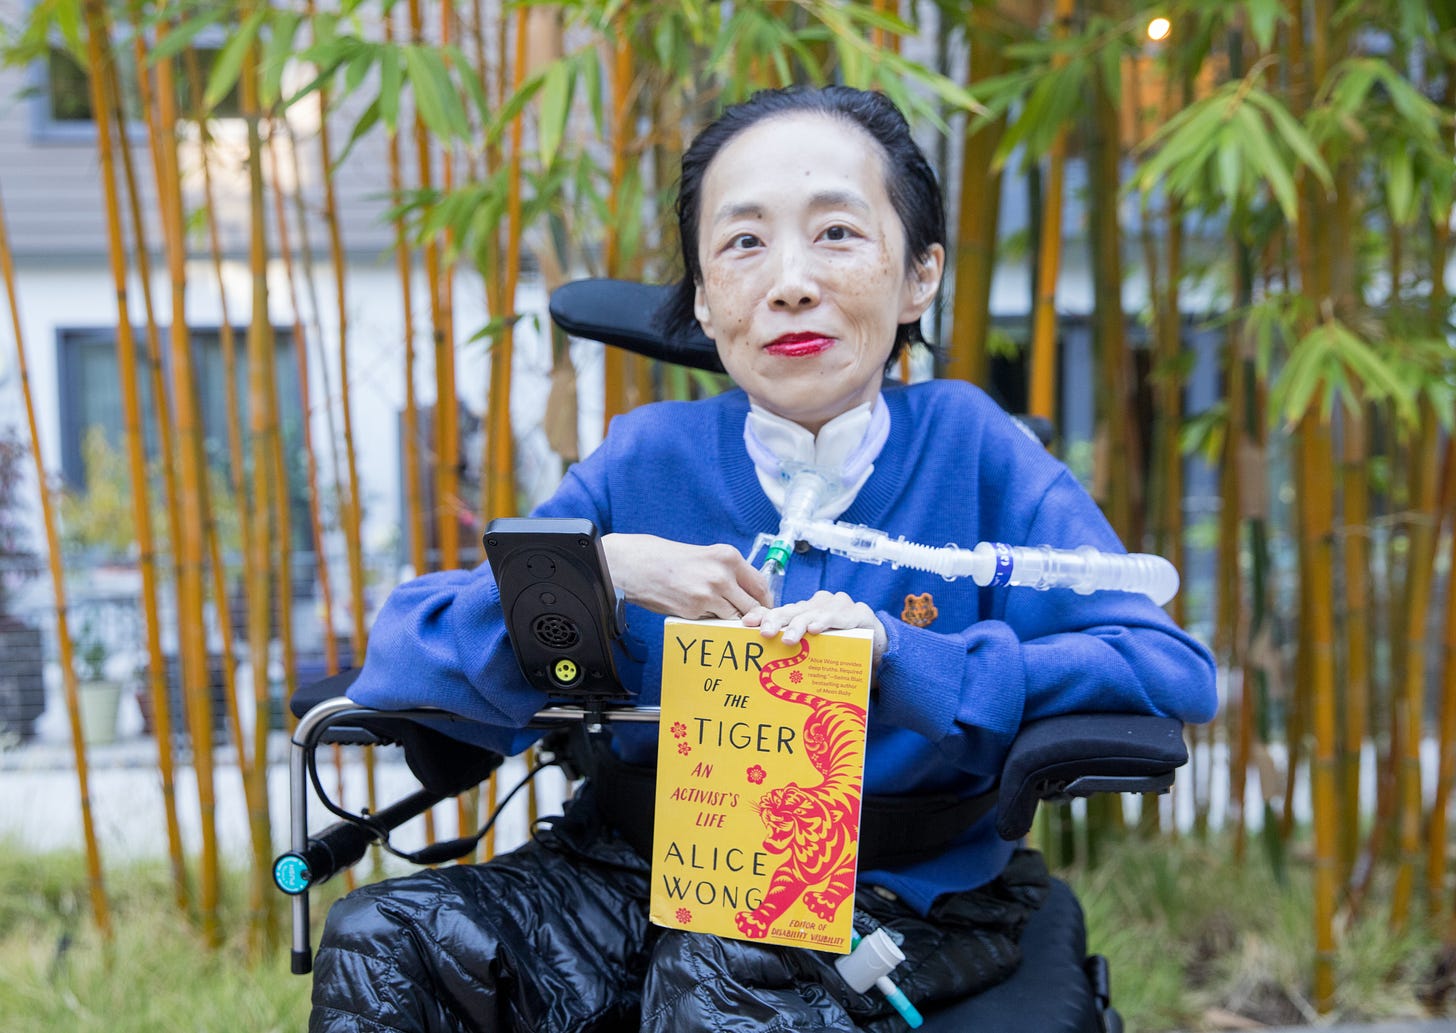 Photo of Alice Wong, an Asian American disabled woman in a power chair. Behind her are bamboo trees. She is wearing a bold red lip color, blue cardigan with a tiny tiger patch, and black puffy pants. A trach and ventilator tube is at her neck and shoulder. She is holding a copy of her memoir, YEAR OF THE TIGER, a yellow book cover with a fierce tiger and red flowers with the text after the title, An Activist’s Life, Alice Wong, Editor of Disability Visibility. Photo credit: Eddie Hernandez Photography.